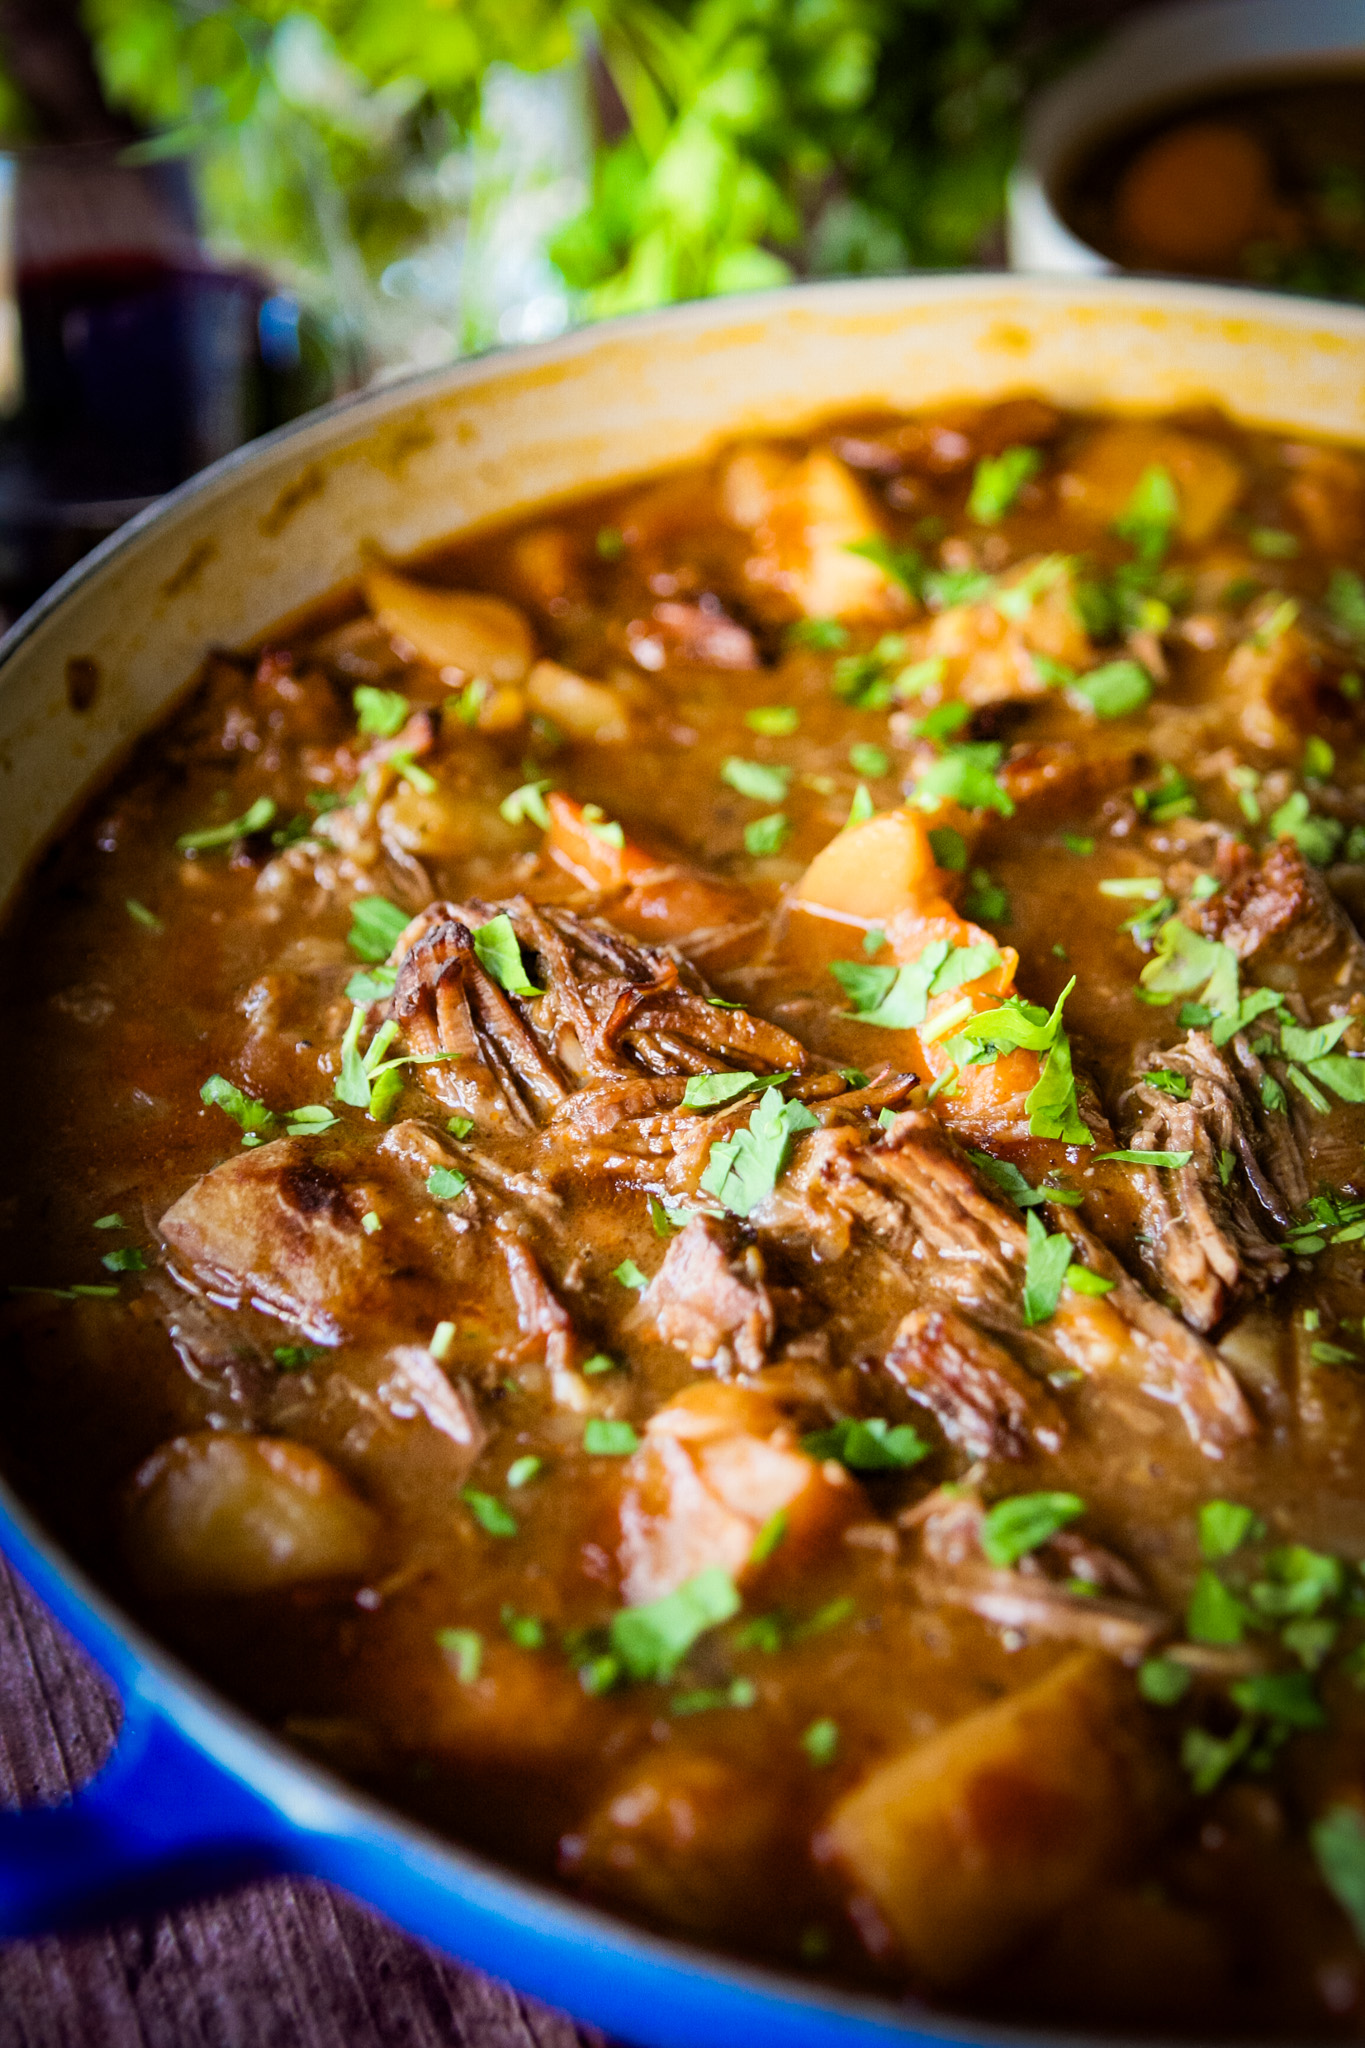 Cozy up to the comforting flavors of this Instant Pot beef stew with red wine - tender beef, rich broth, and hearty vegetables combine effortlessly for a soul-warming meal.